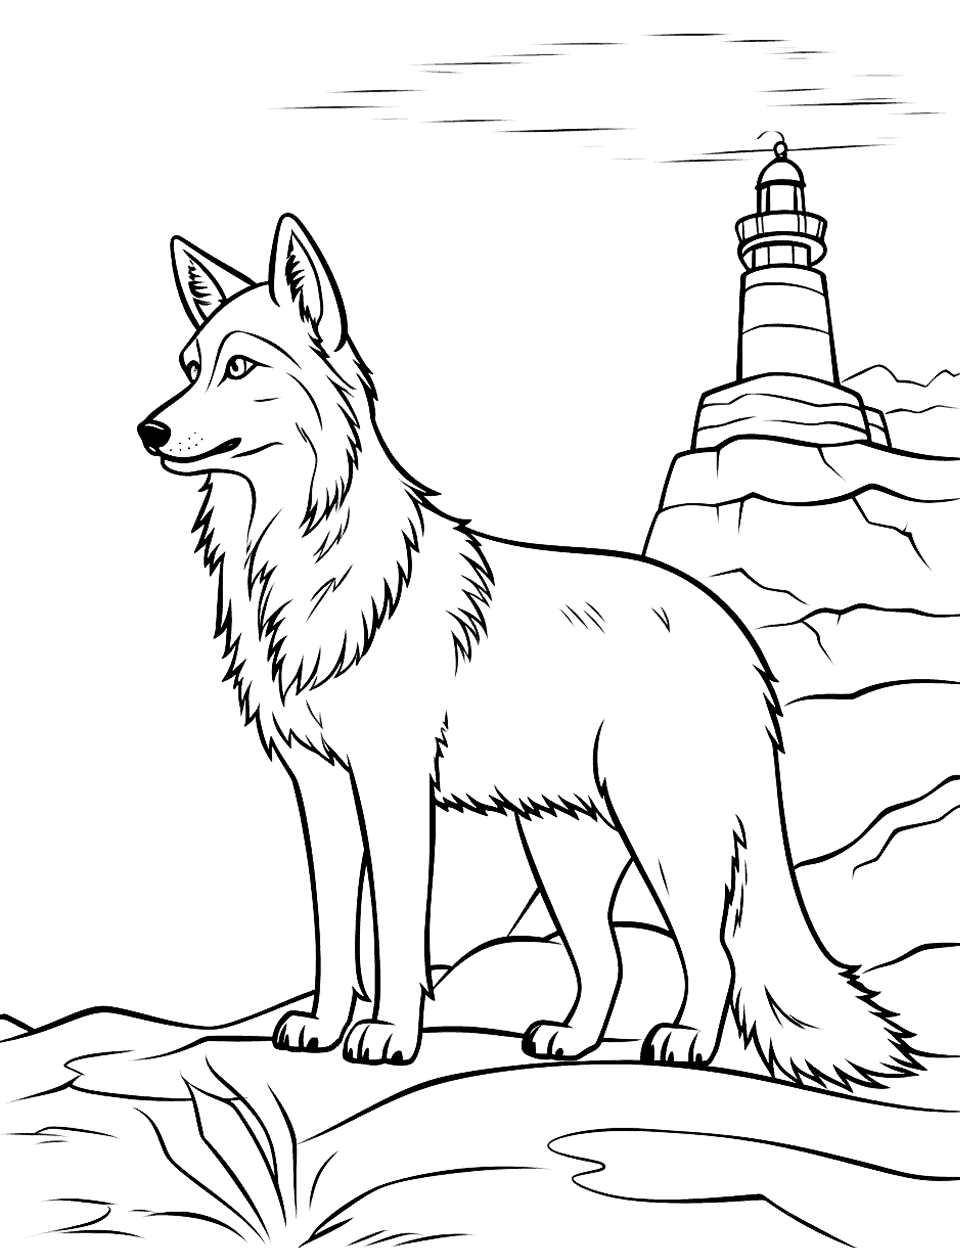 Wolf and the Lighthouse Coloring Page - A wolf on a cliff, with a distant lighthouse.